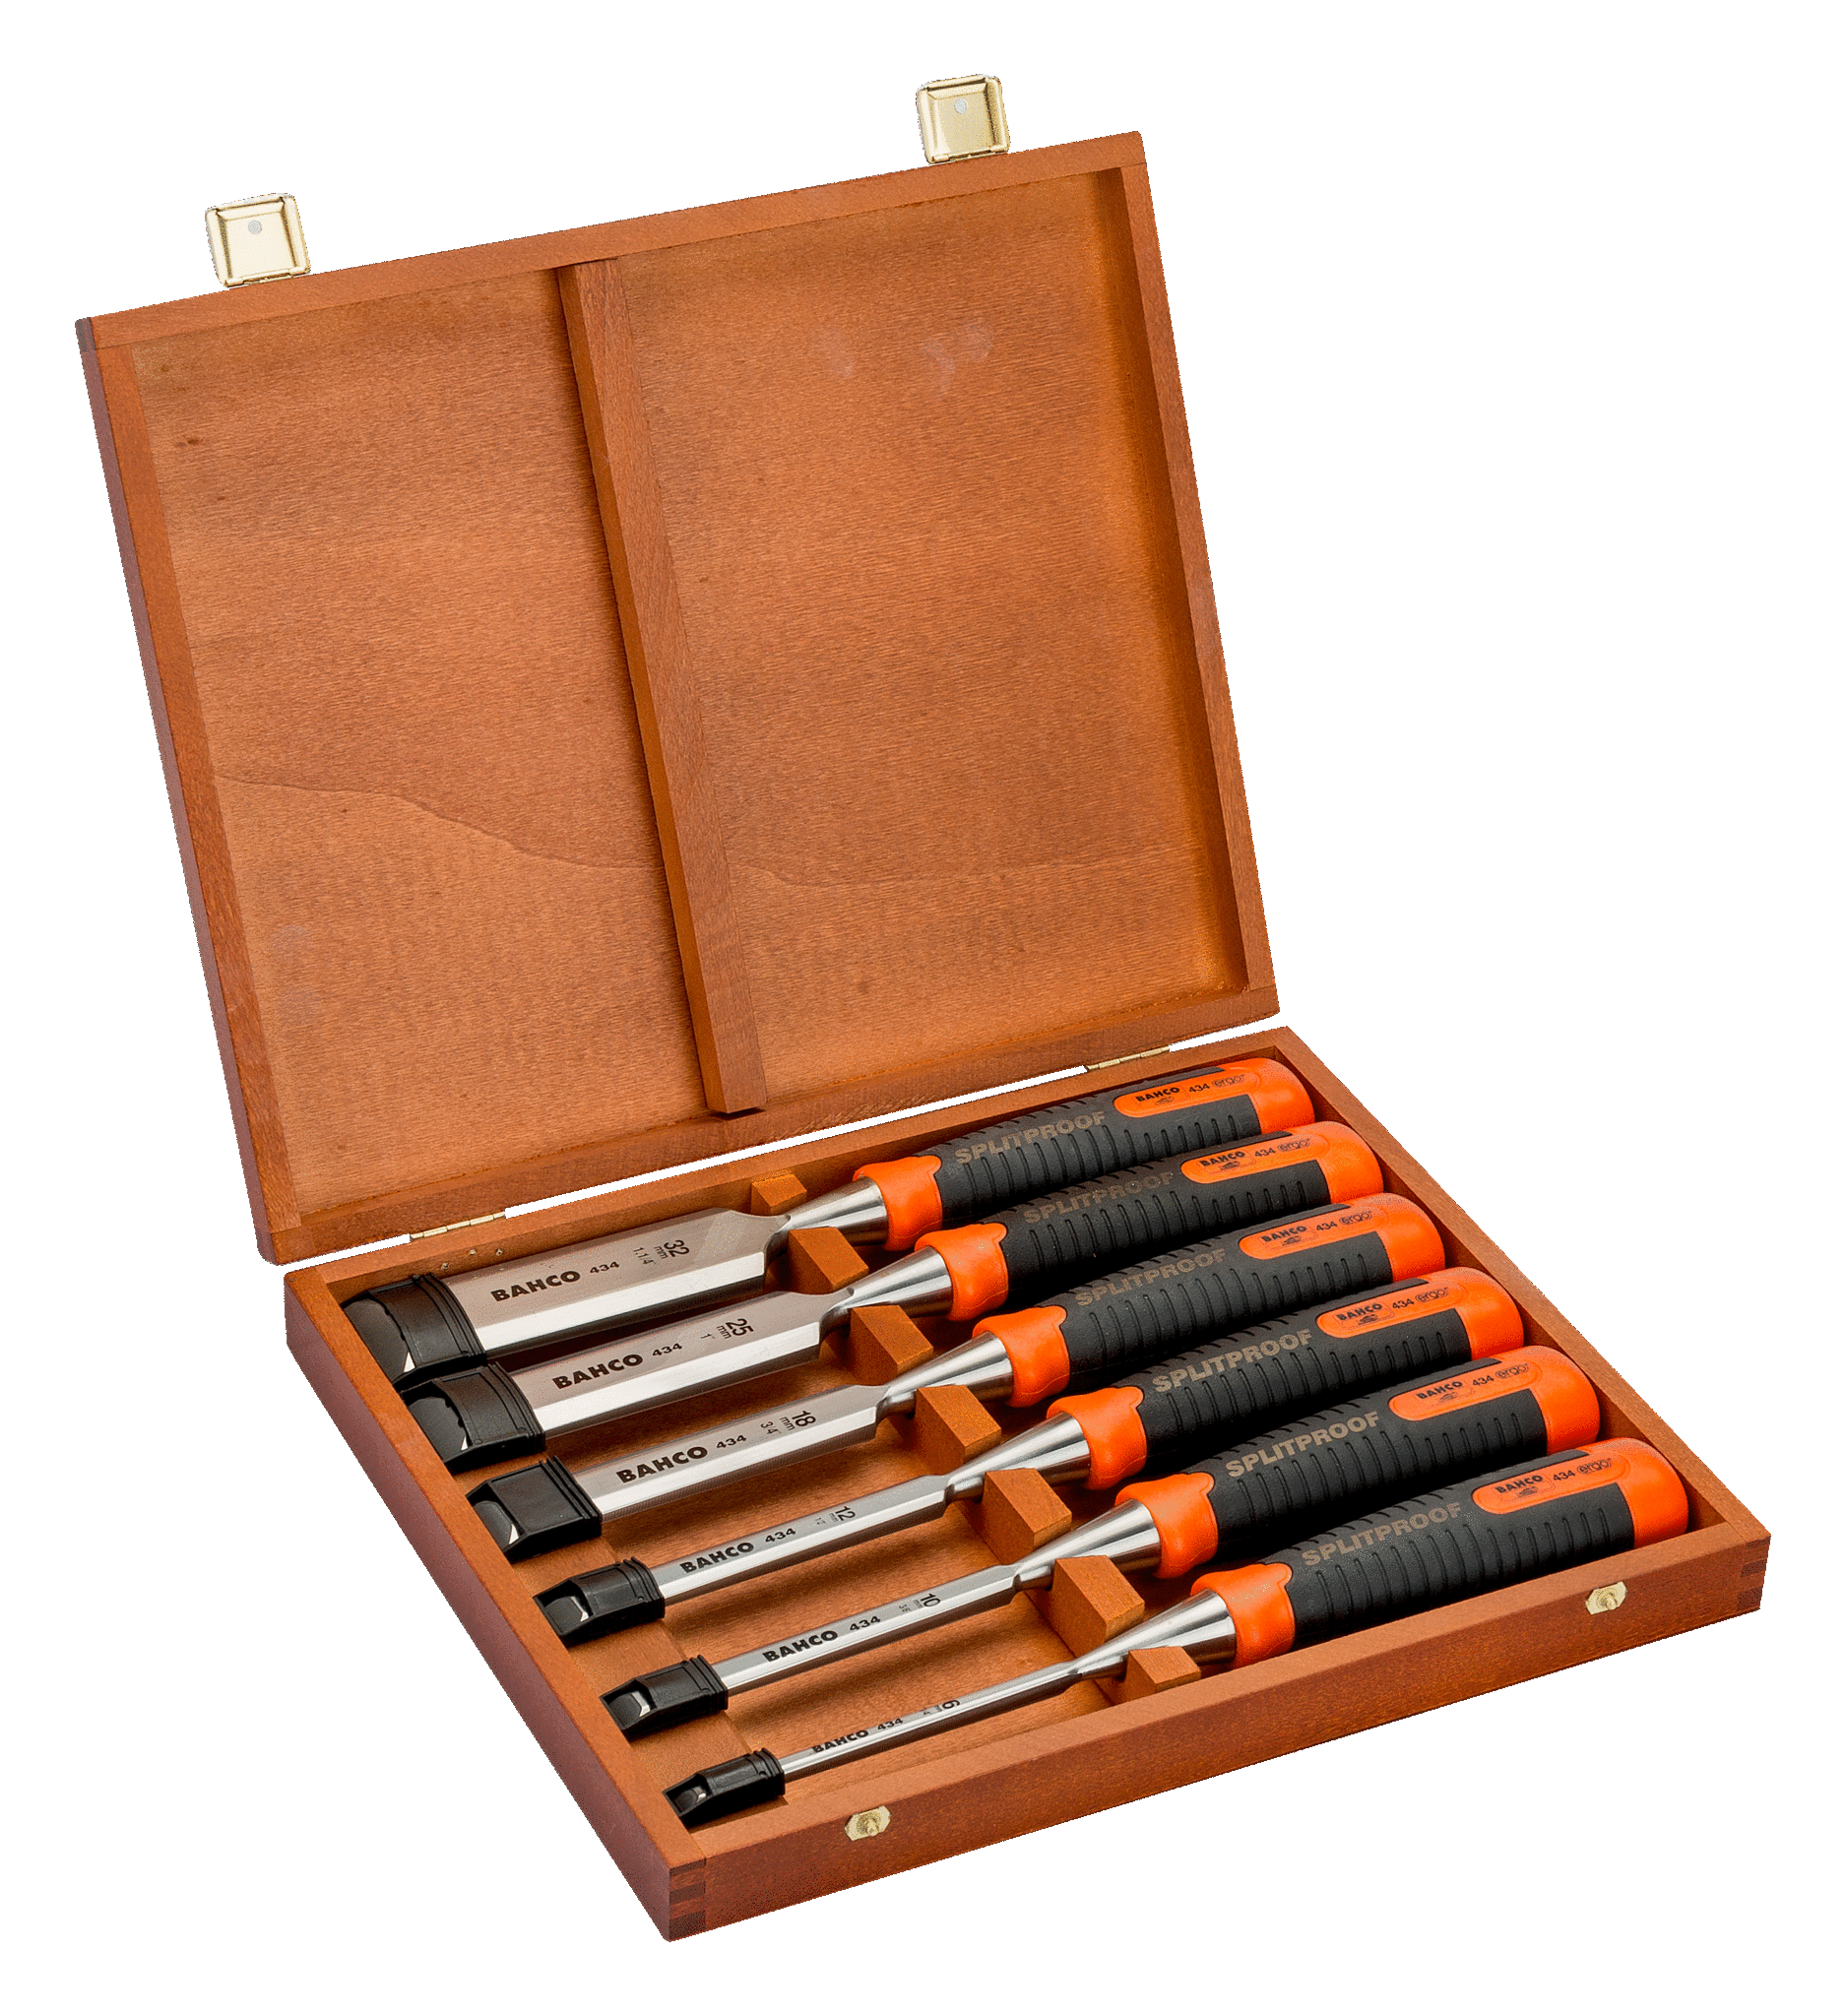 6Pce Woodworking Chisel Set in Wooden Box 434-S6-EUR by Bahco